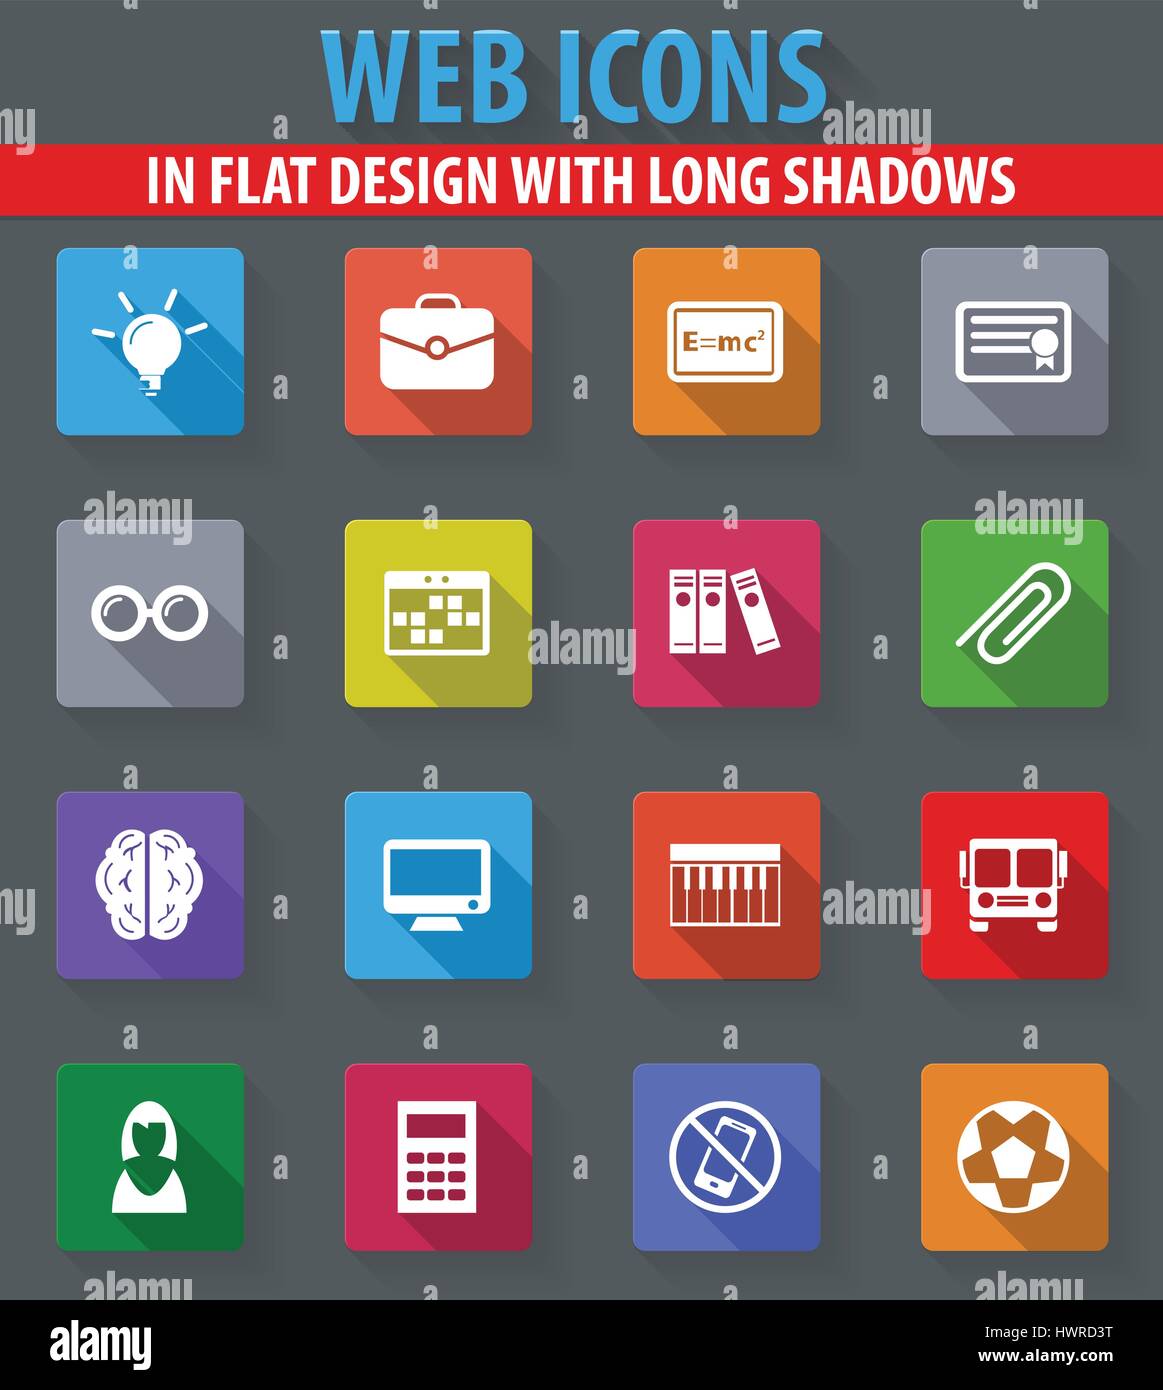 School web icons in flat design with long shadows Stock Vector